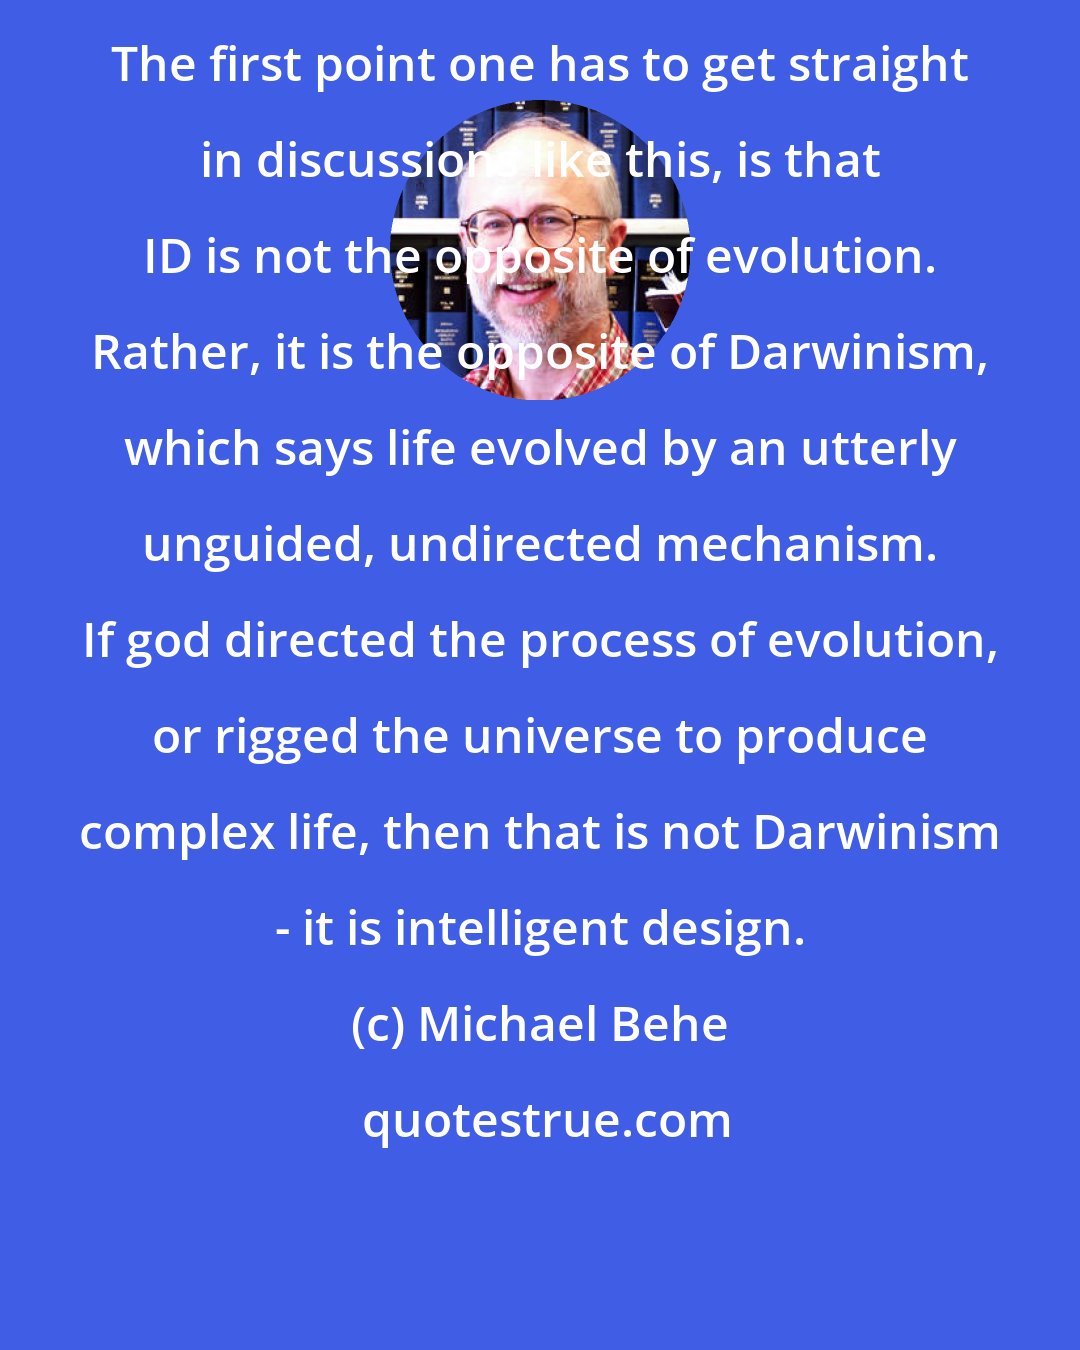 Michael Behe: The first point one has to get straight in discussions like this, is that ID is not the opposite of evolution. Rather, it is the opposite of Darwinism, which says life evolved by an utterly unguided, undirected mechanism. If god directed the process of evolution, or rigged the universe to produce complex life, then that is not Darwinism - it is intelligent design.